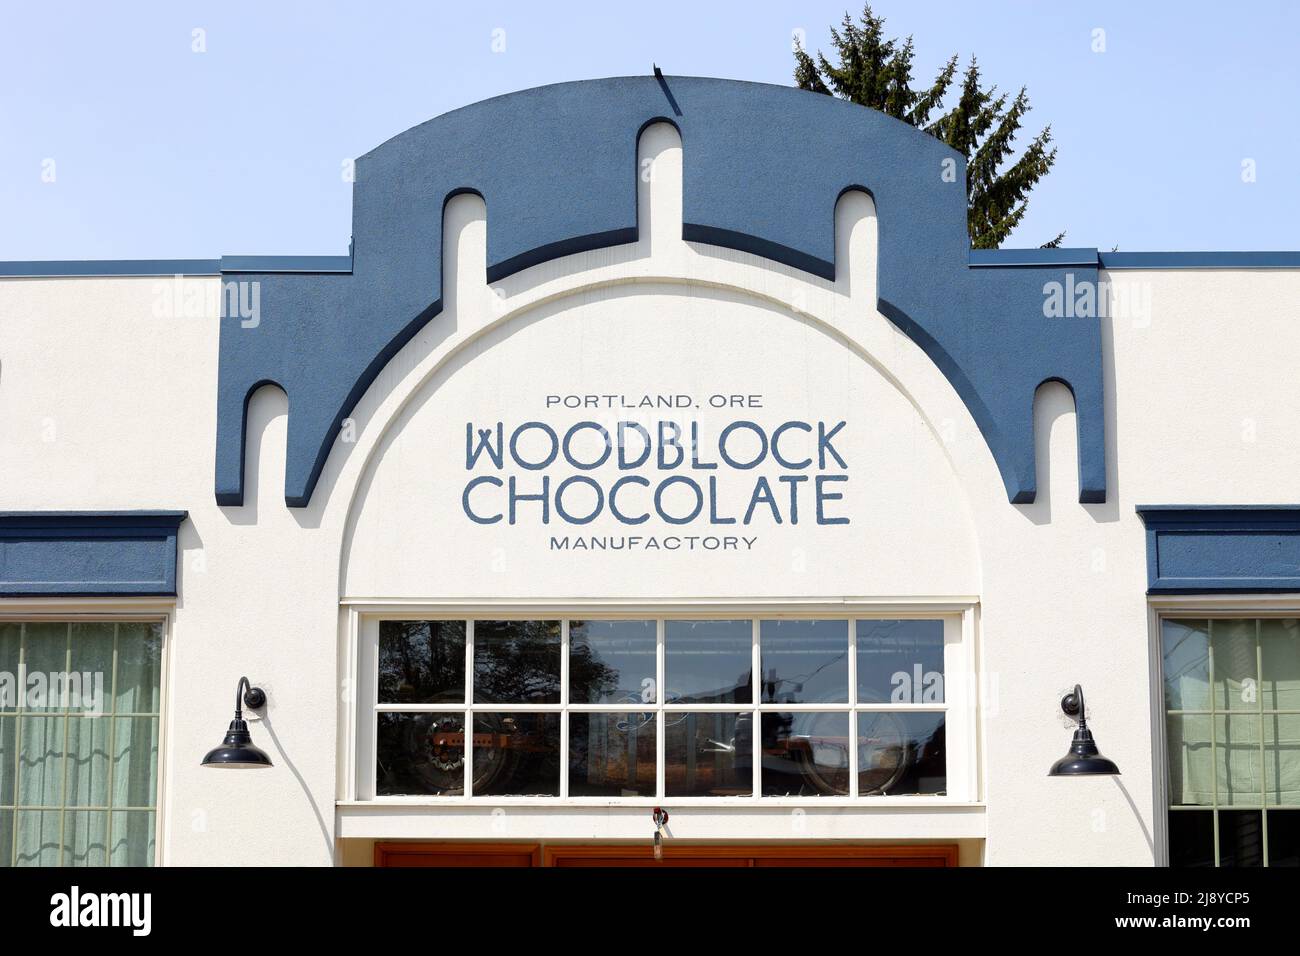 Woodblock Chocolate, 1715 NE 17th Ave, Portland, Oregon. exterior storefront of a chocolate factory. Stock Photo